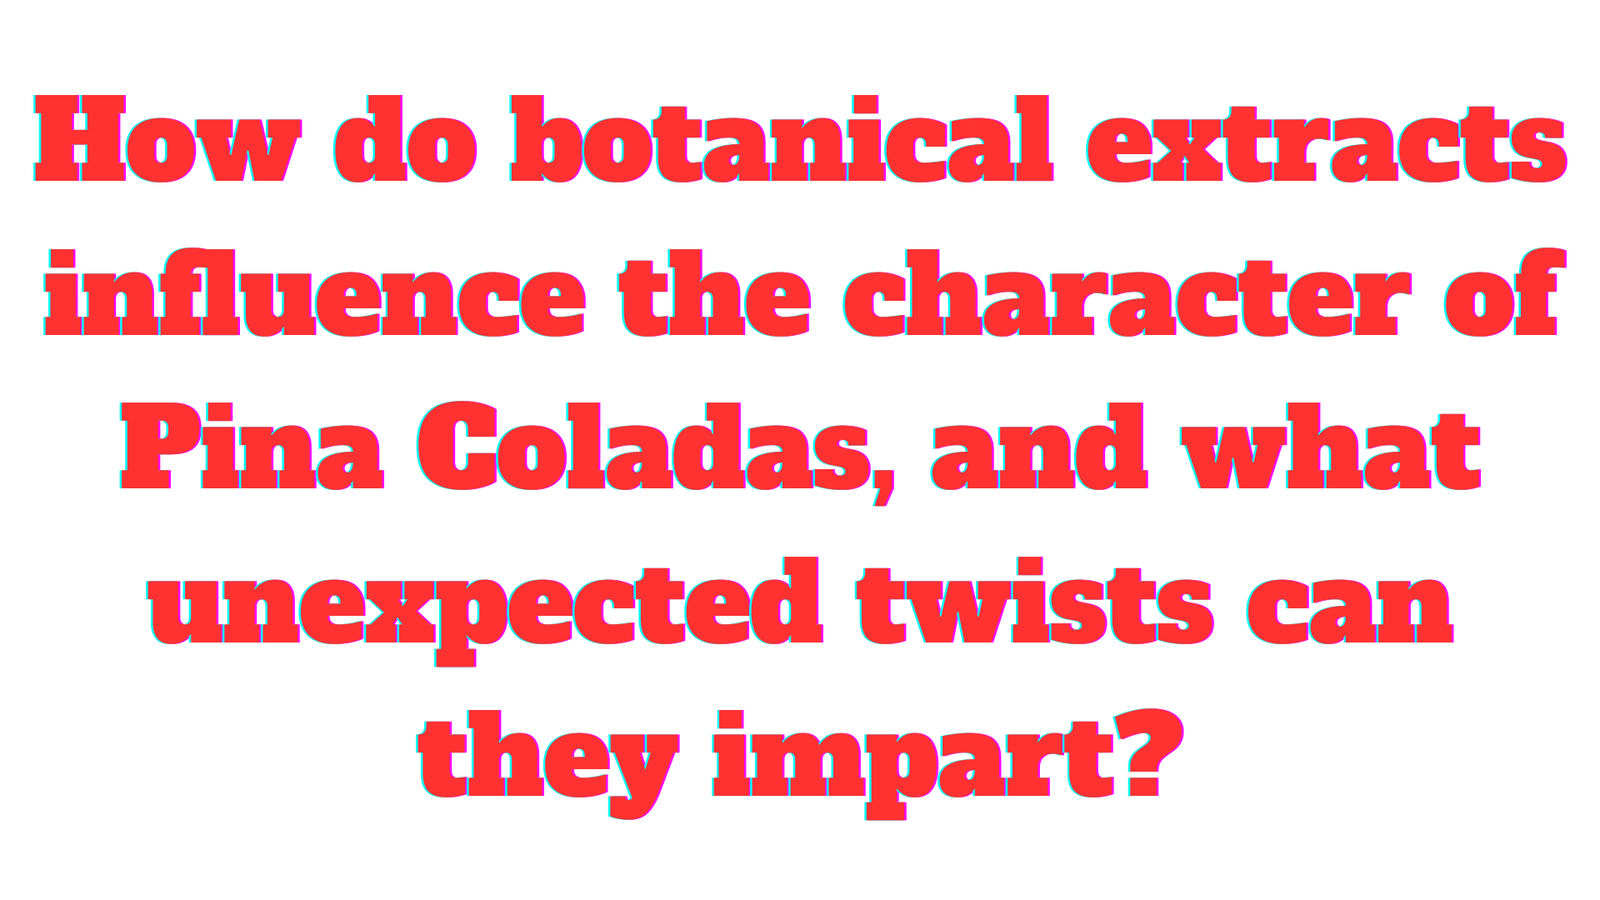 How do botanical extracts influence the character of Pina Coladas, and what unexpected twists can they impart?